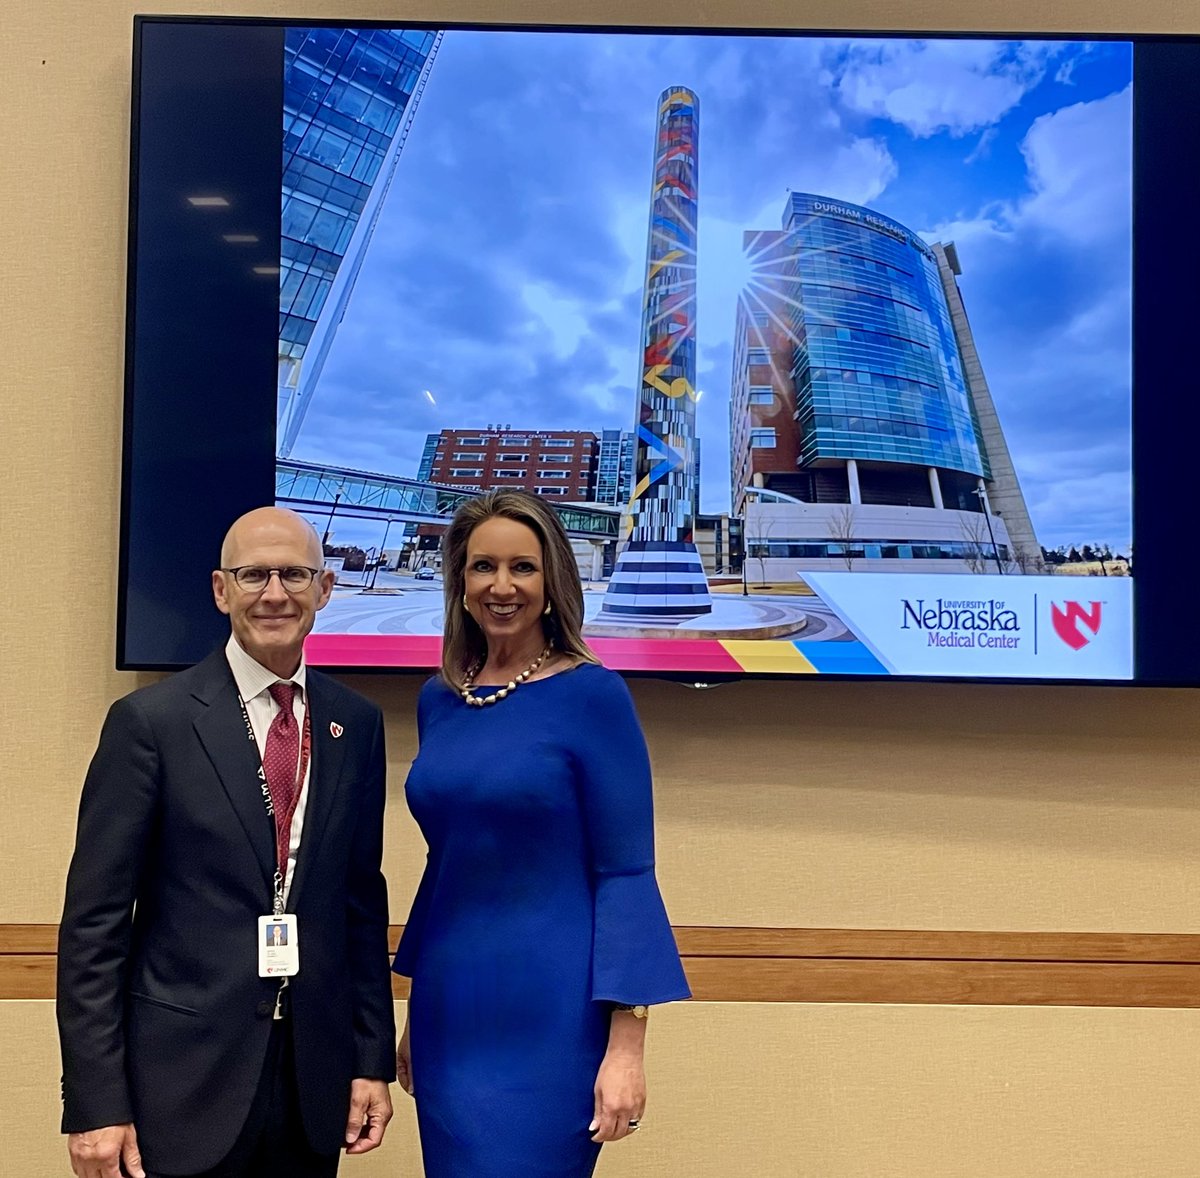 It was an honor to provide the Keynote Presentation for the College of Pharmacy Research Day at University of Nebraska Medical Center. Thank you Dean Olsen & the @UnmcCop team! I was impressed with the innovative research at UNMC — true leaders in pharmacy! #UNMCLabs #WarEagle